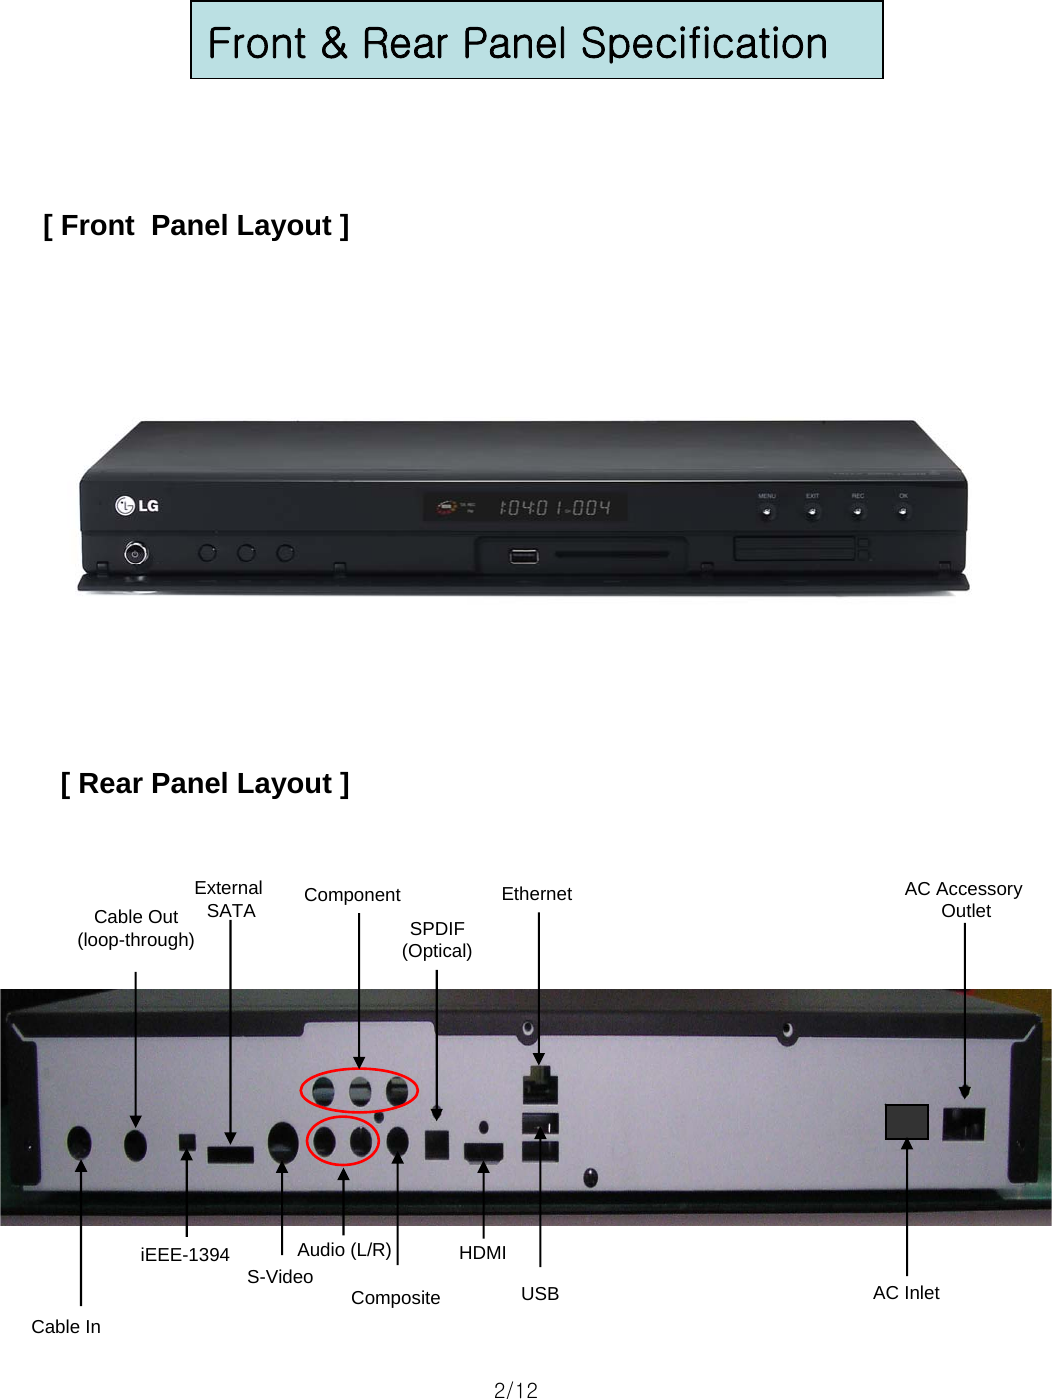 Front &amp; Rear Panel Specification [ Front  Panel Layout ][ Rear Panel Layout ]2/12 Cable InCable Out(loop-through)Ethernet S-Video CompositeComponentSPDIF(Optical)HDMIAC AccessoryOutletAudio (L/R)USBiEEE-1394External SATAAC Inlet